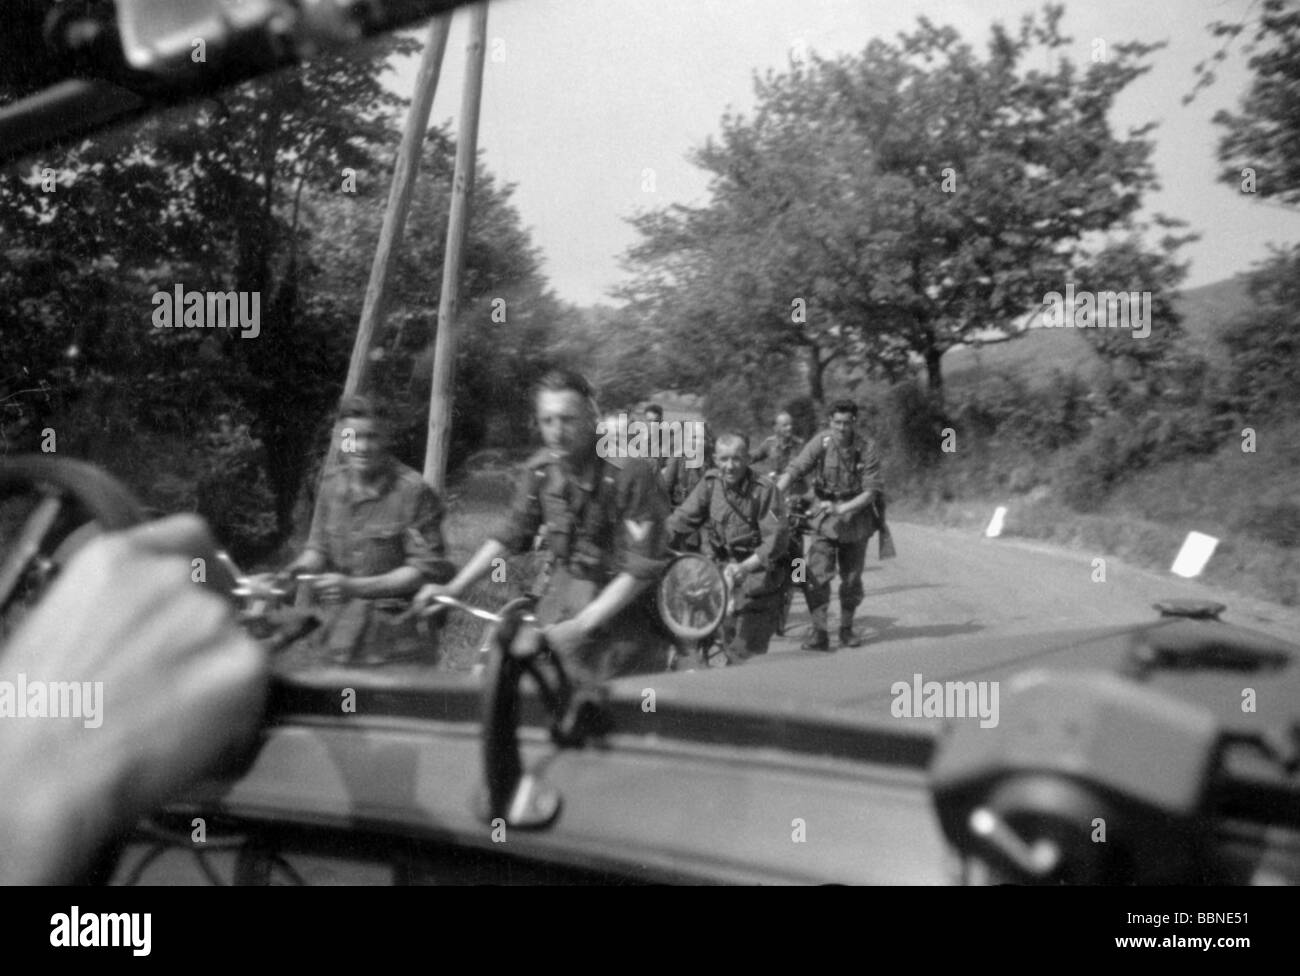 events, Second World War / WWII, France, German occupation, Wehrmacht car passing a group of German soldiers with bicycles, 20th century, historic, historical, Southern France, Third Reich, people, 1940s, Stock Photo